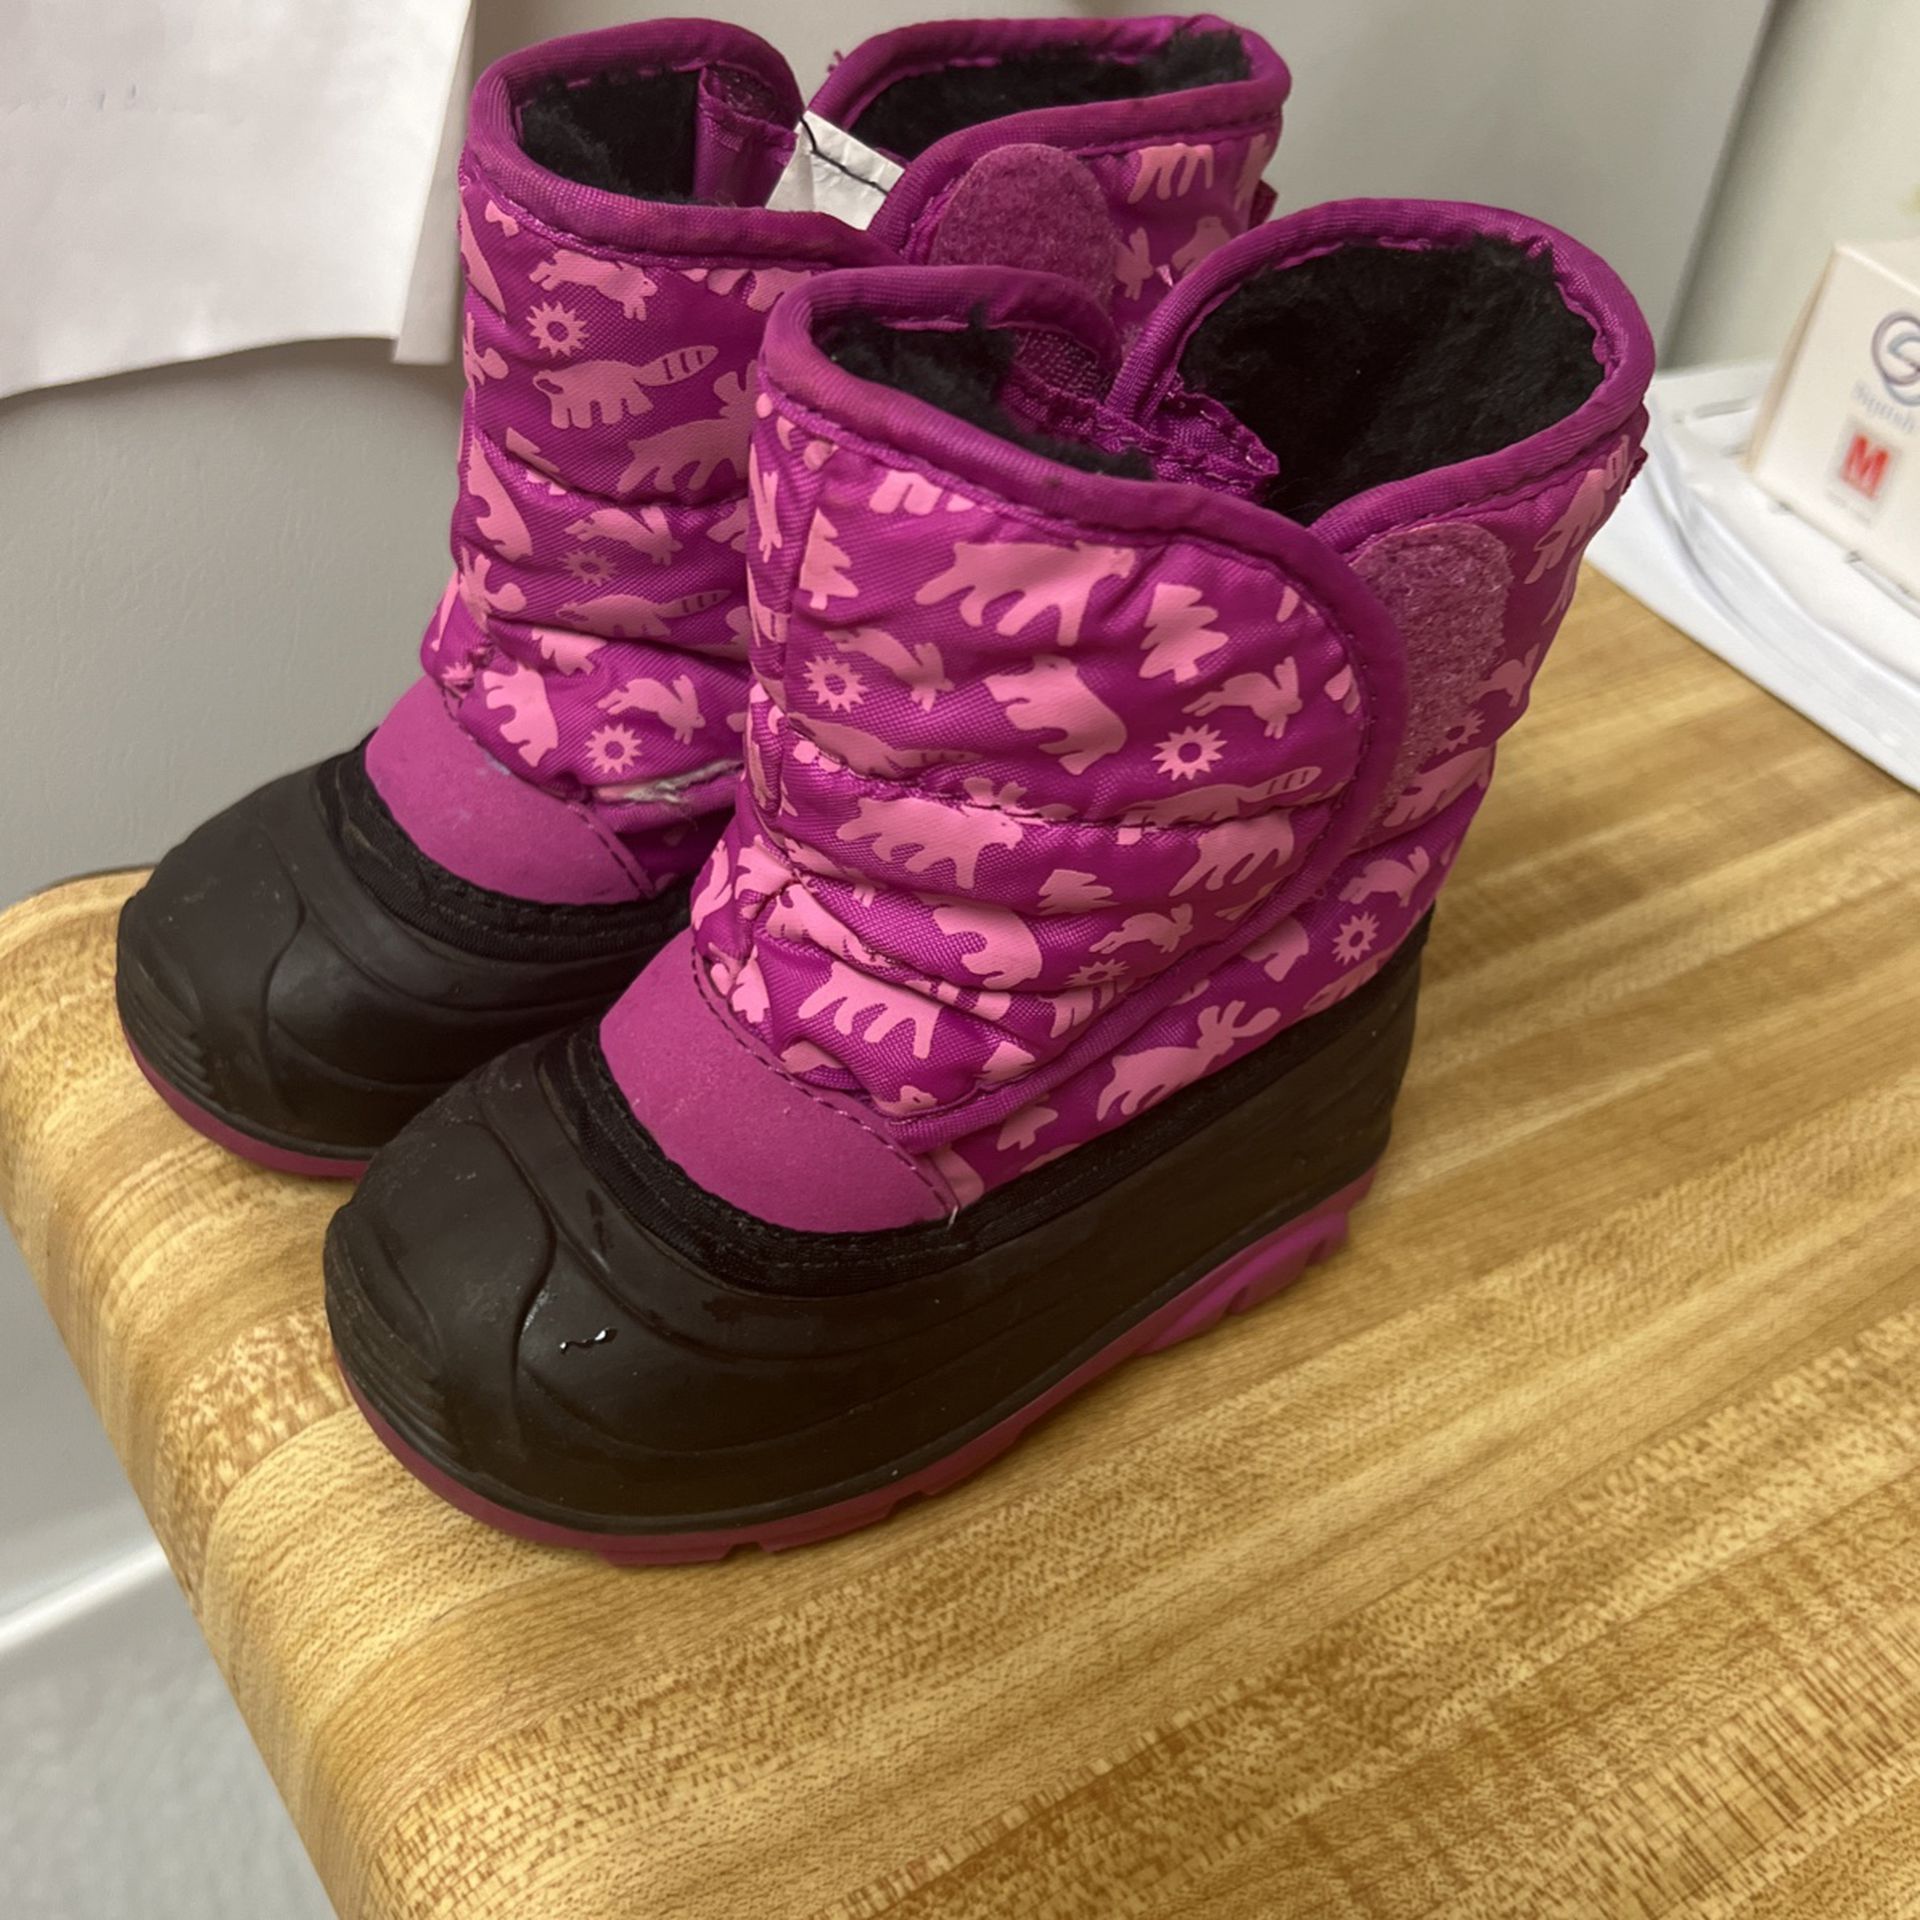 Winter boots for girls size 7